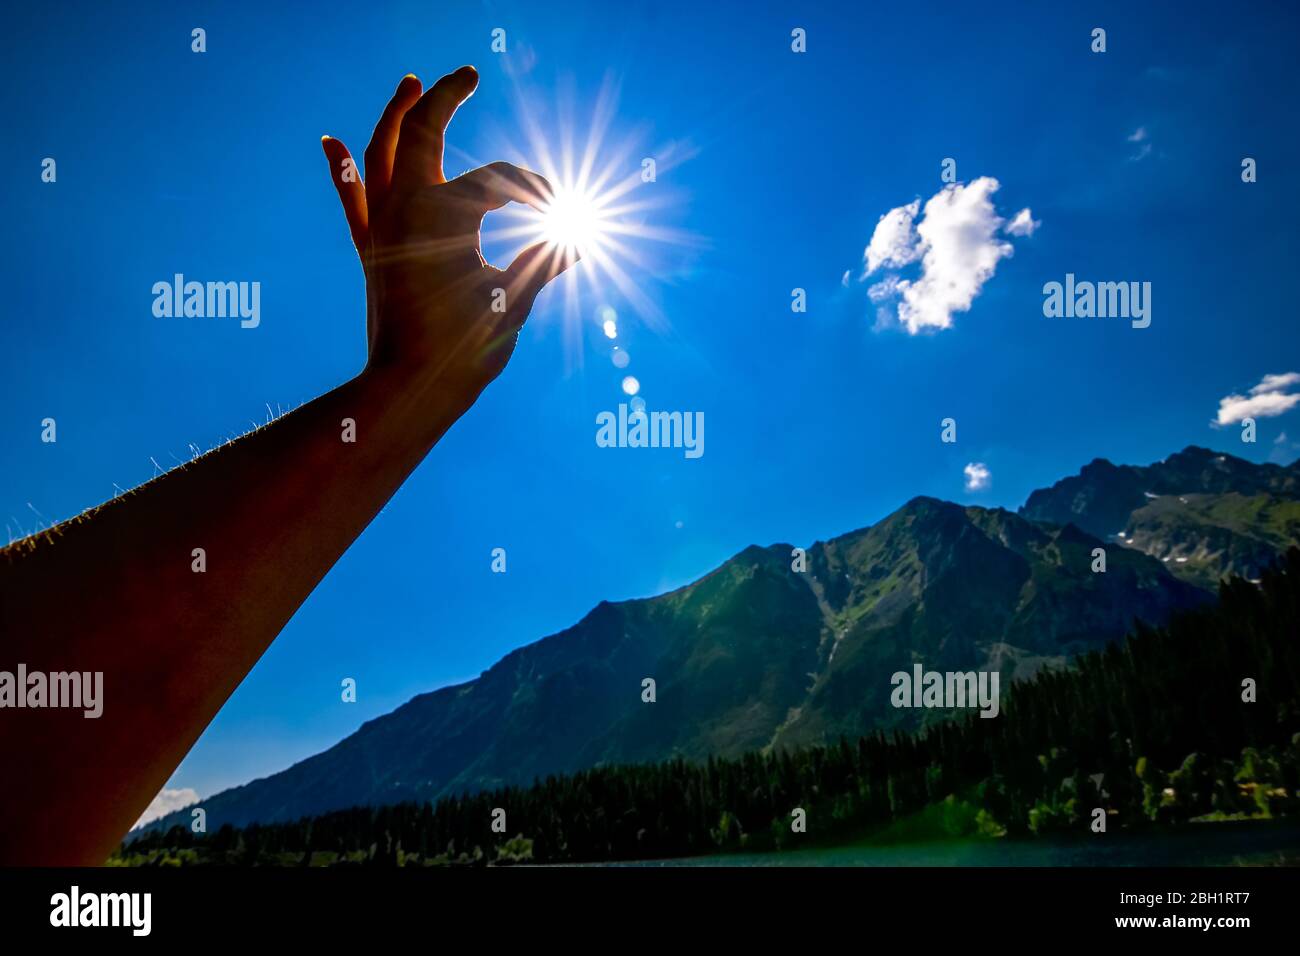 star of sun in hand with blue sky Stock Photo